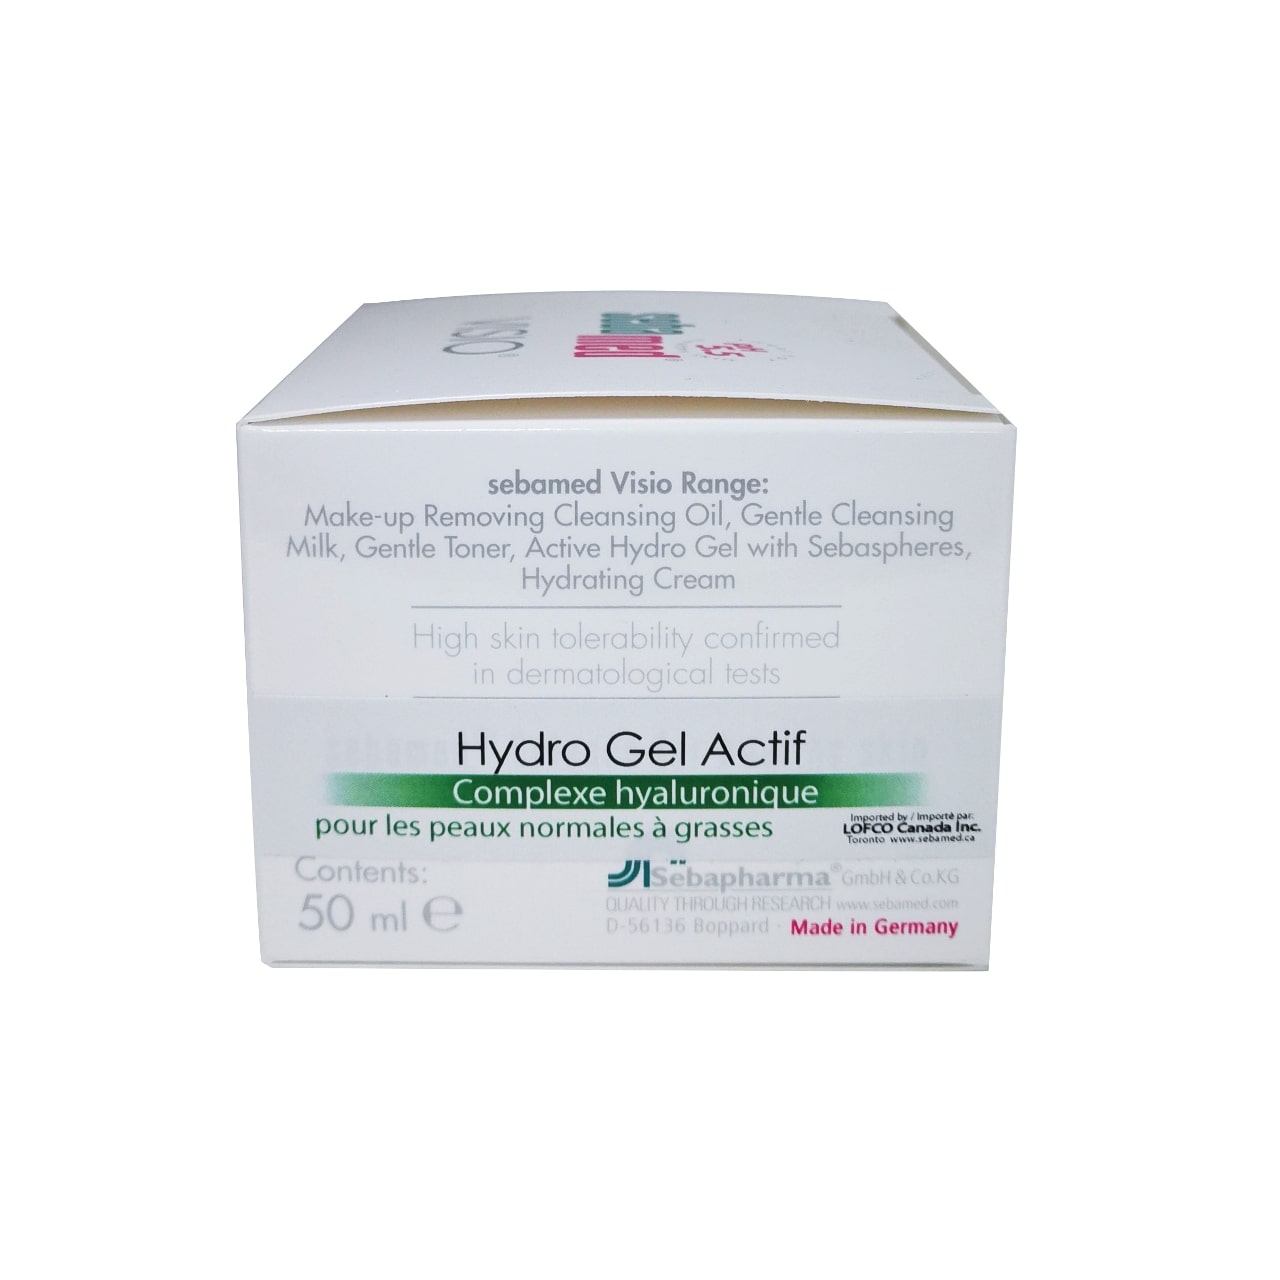 List of Sebamed Visio products